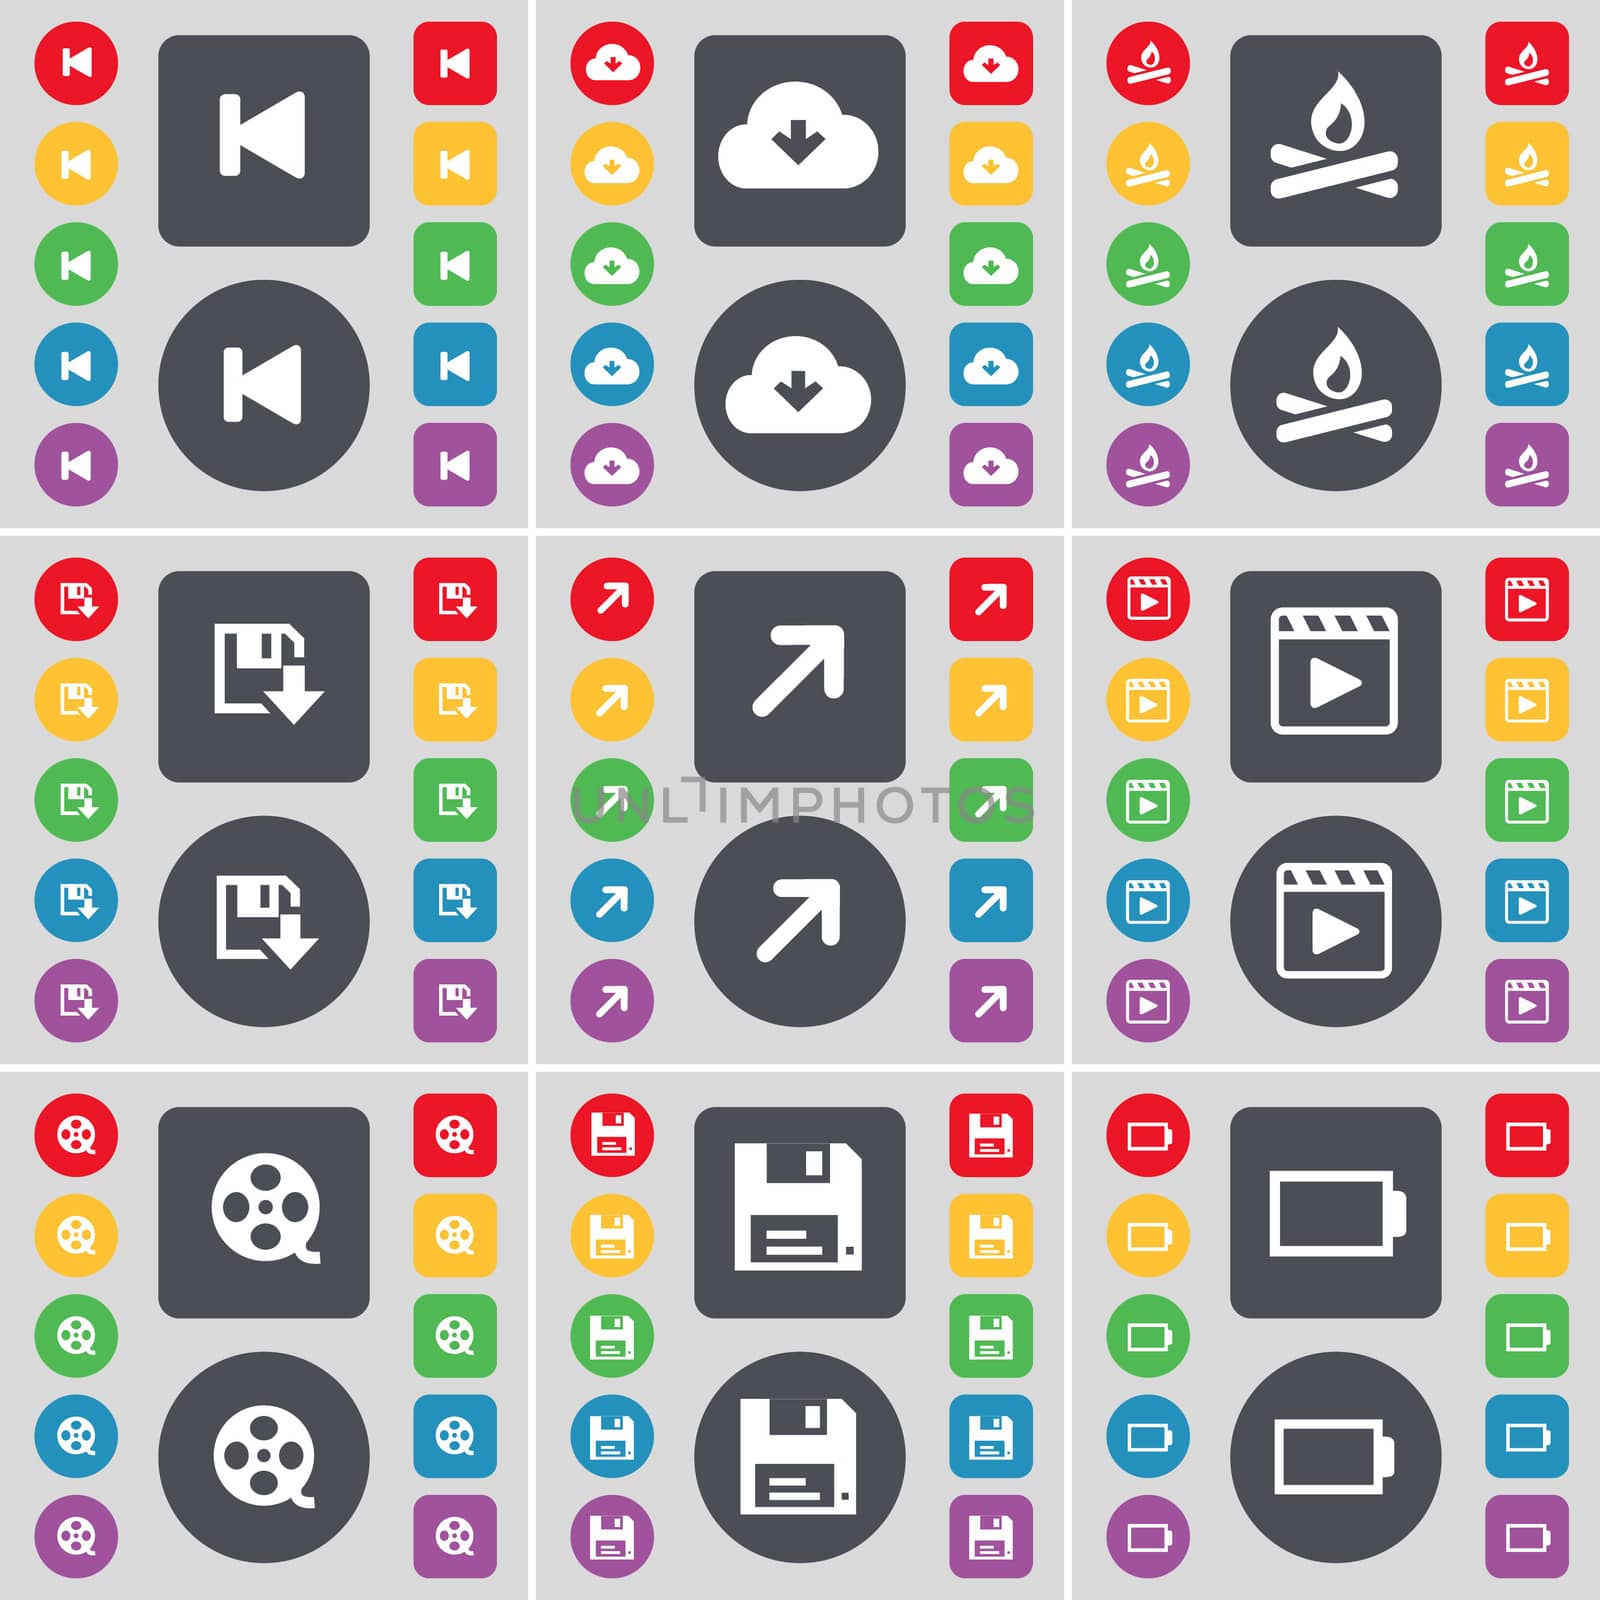 Media skip, Cloud, Campfire, Floppy, Full screen, Media player, Videotape, Floppy, Battery icon symbol. A large set of flat, colored buttons for your design. illustration